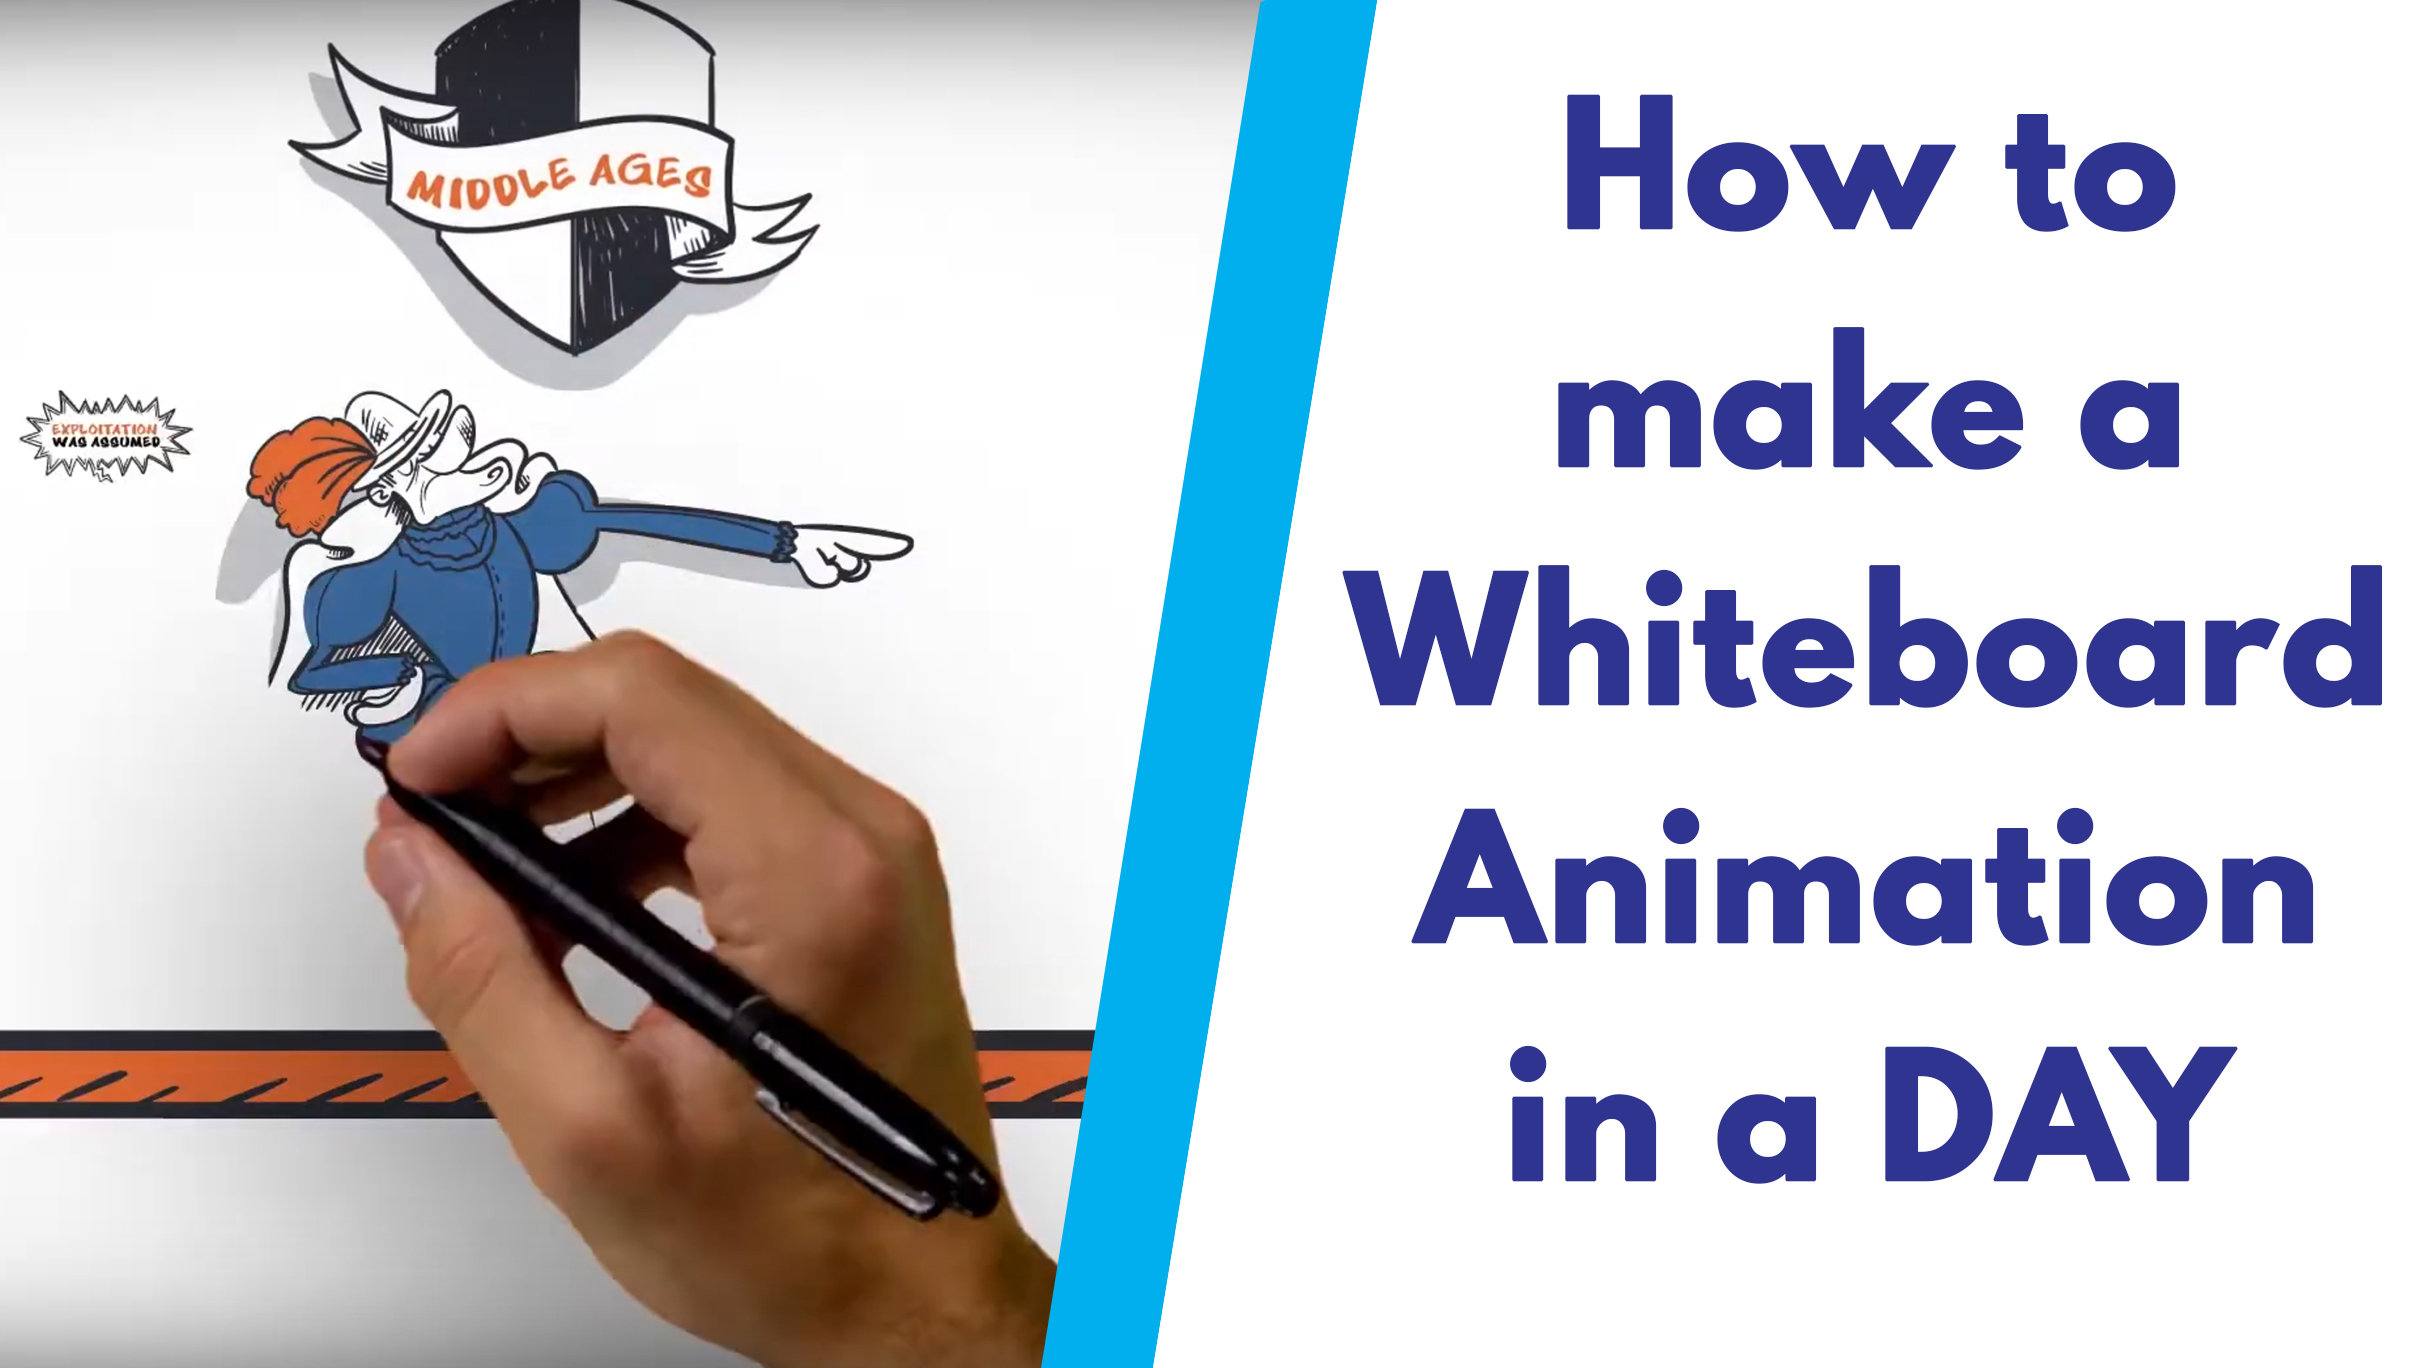 How to Make a Whiteboard Animation in a Day